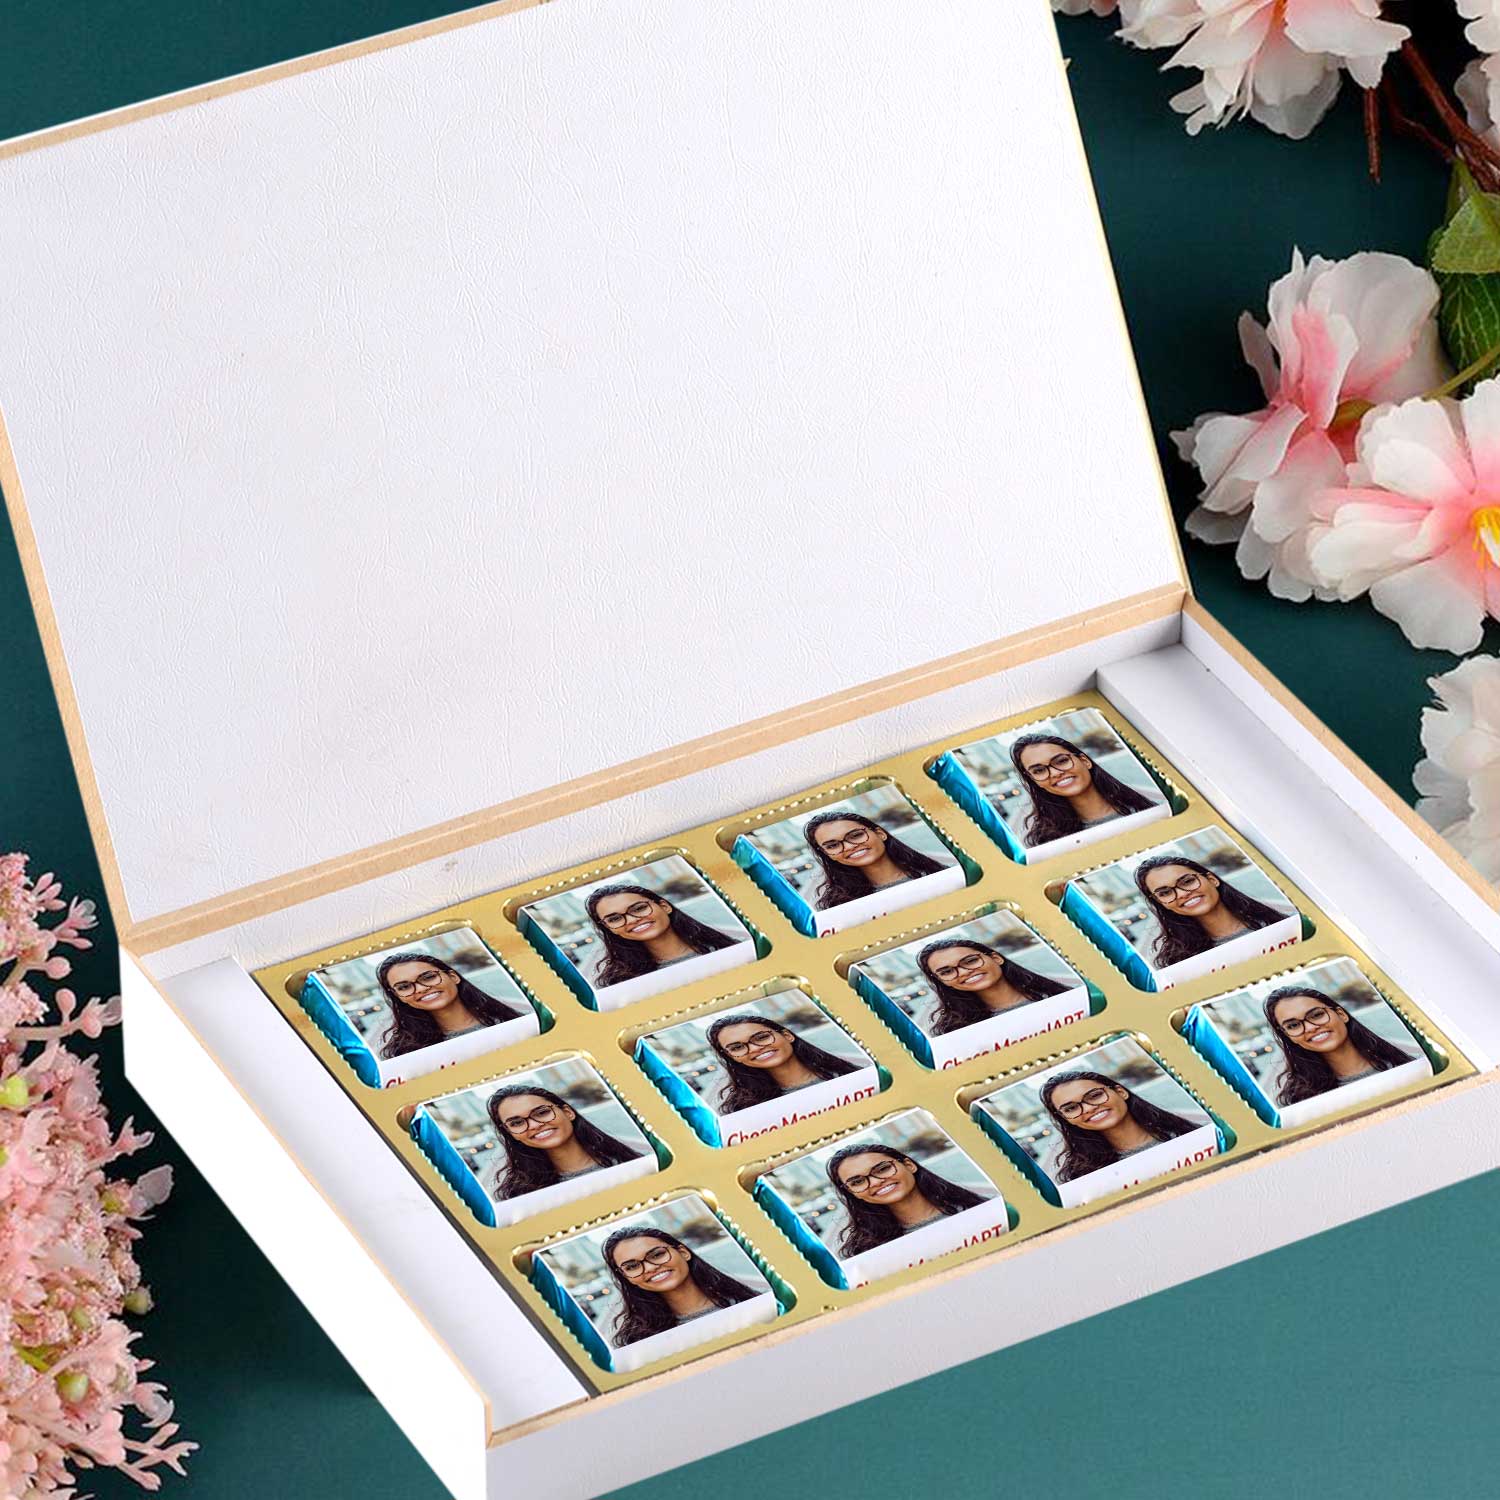 customized white wooden box with wrapper all-printed chocolates. There is also a personalized message printed on Message paper inside the box.